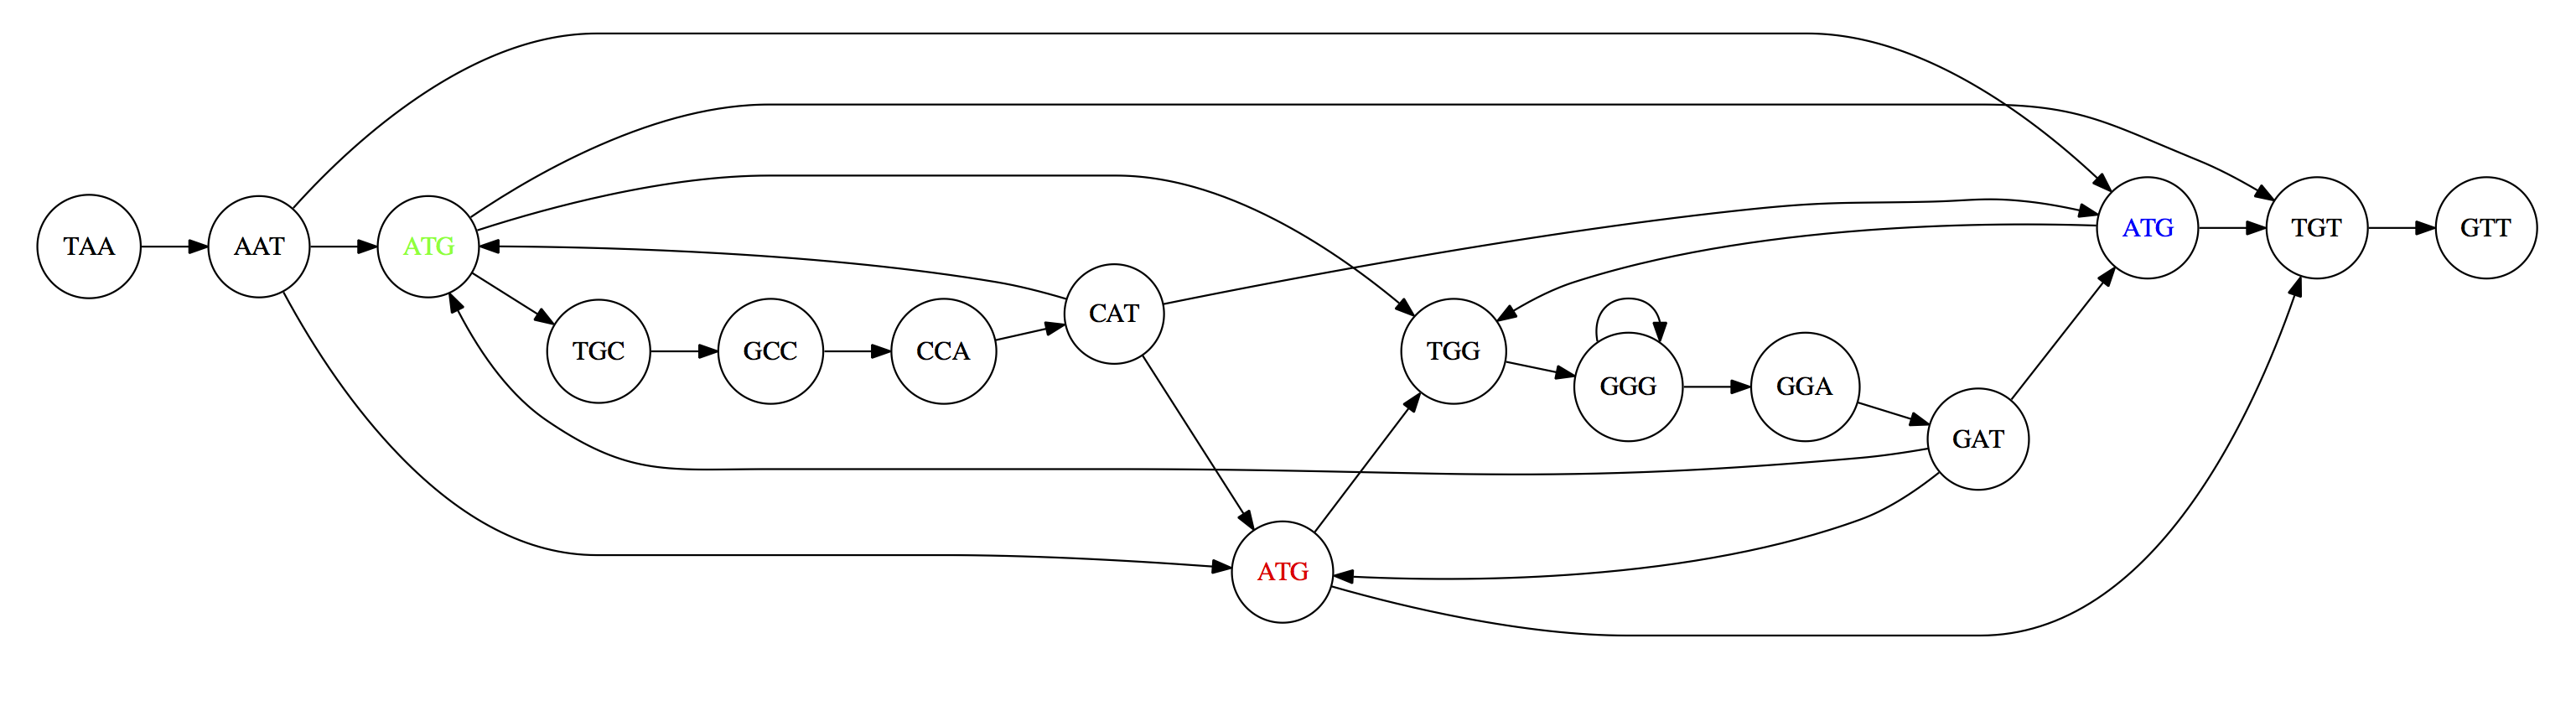 Th above graph is expanded to include a lot more connections between any nodes that share 2 base overlap.